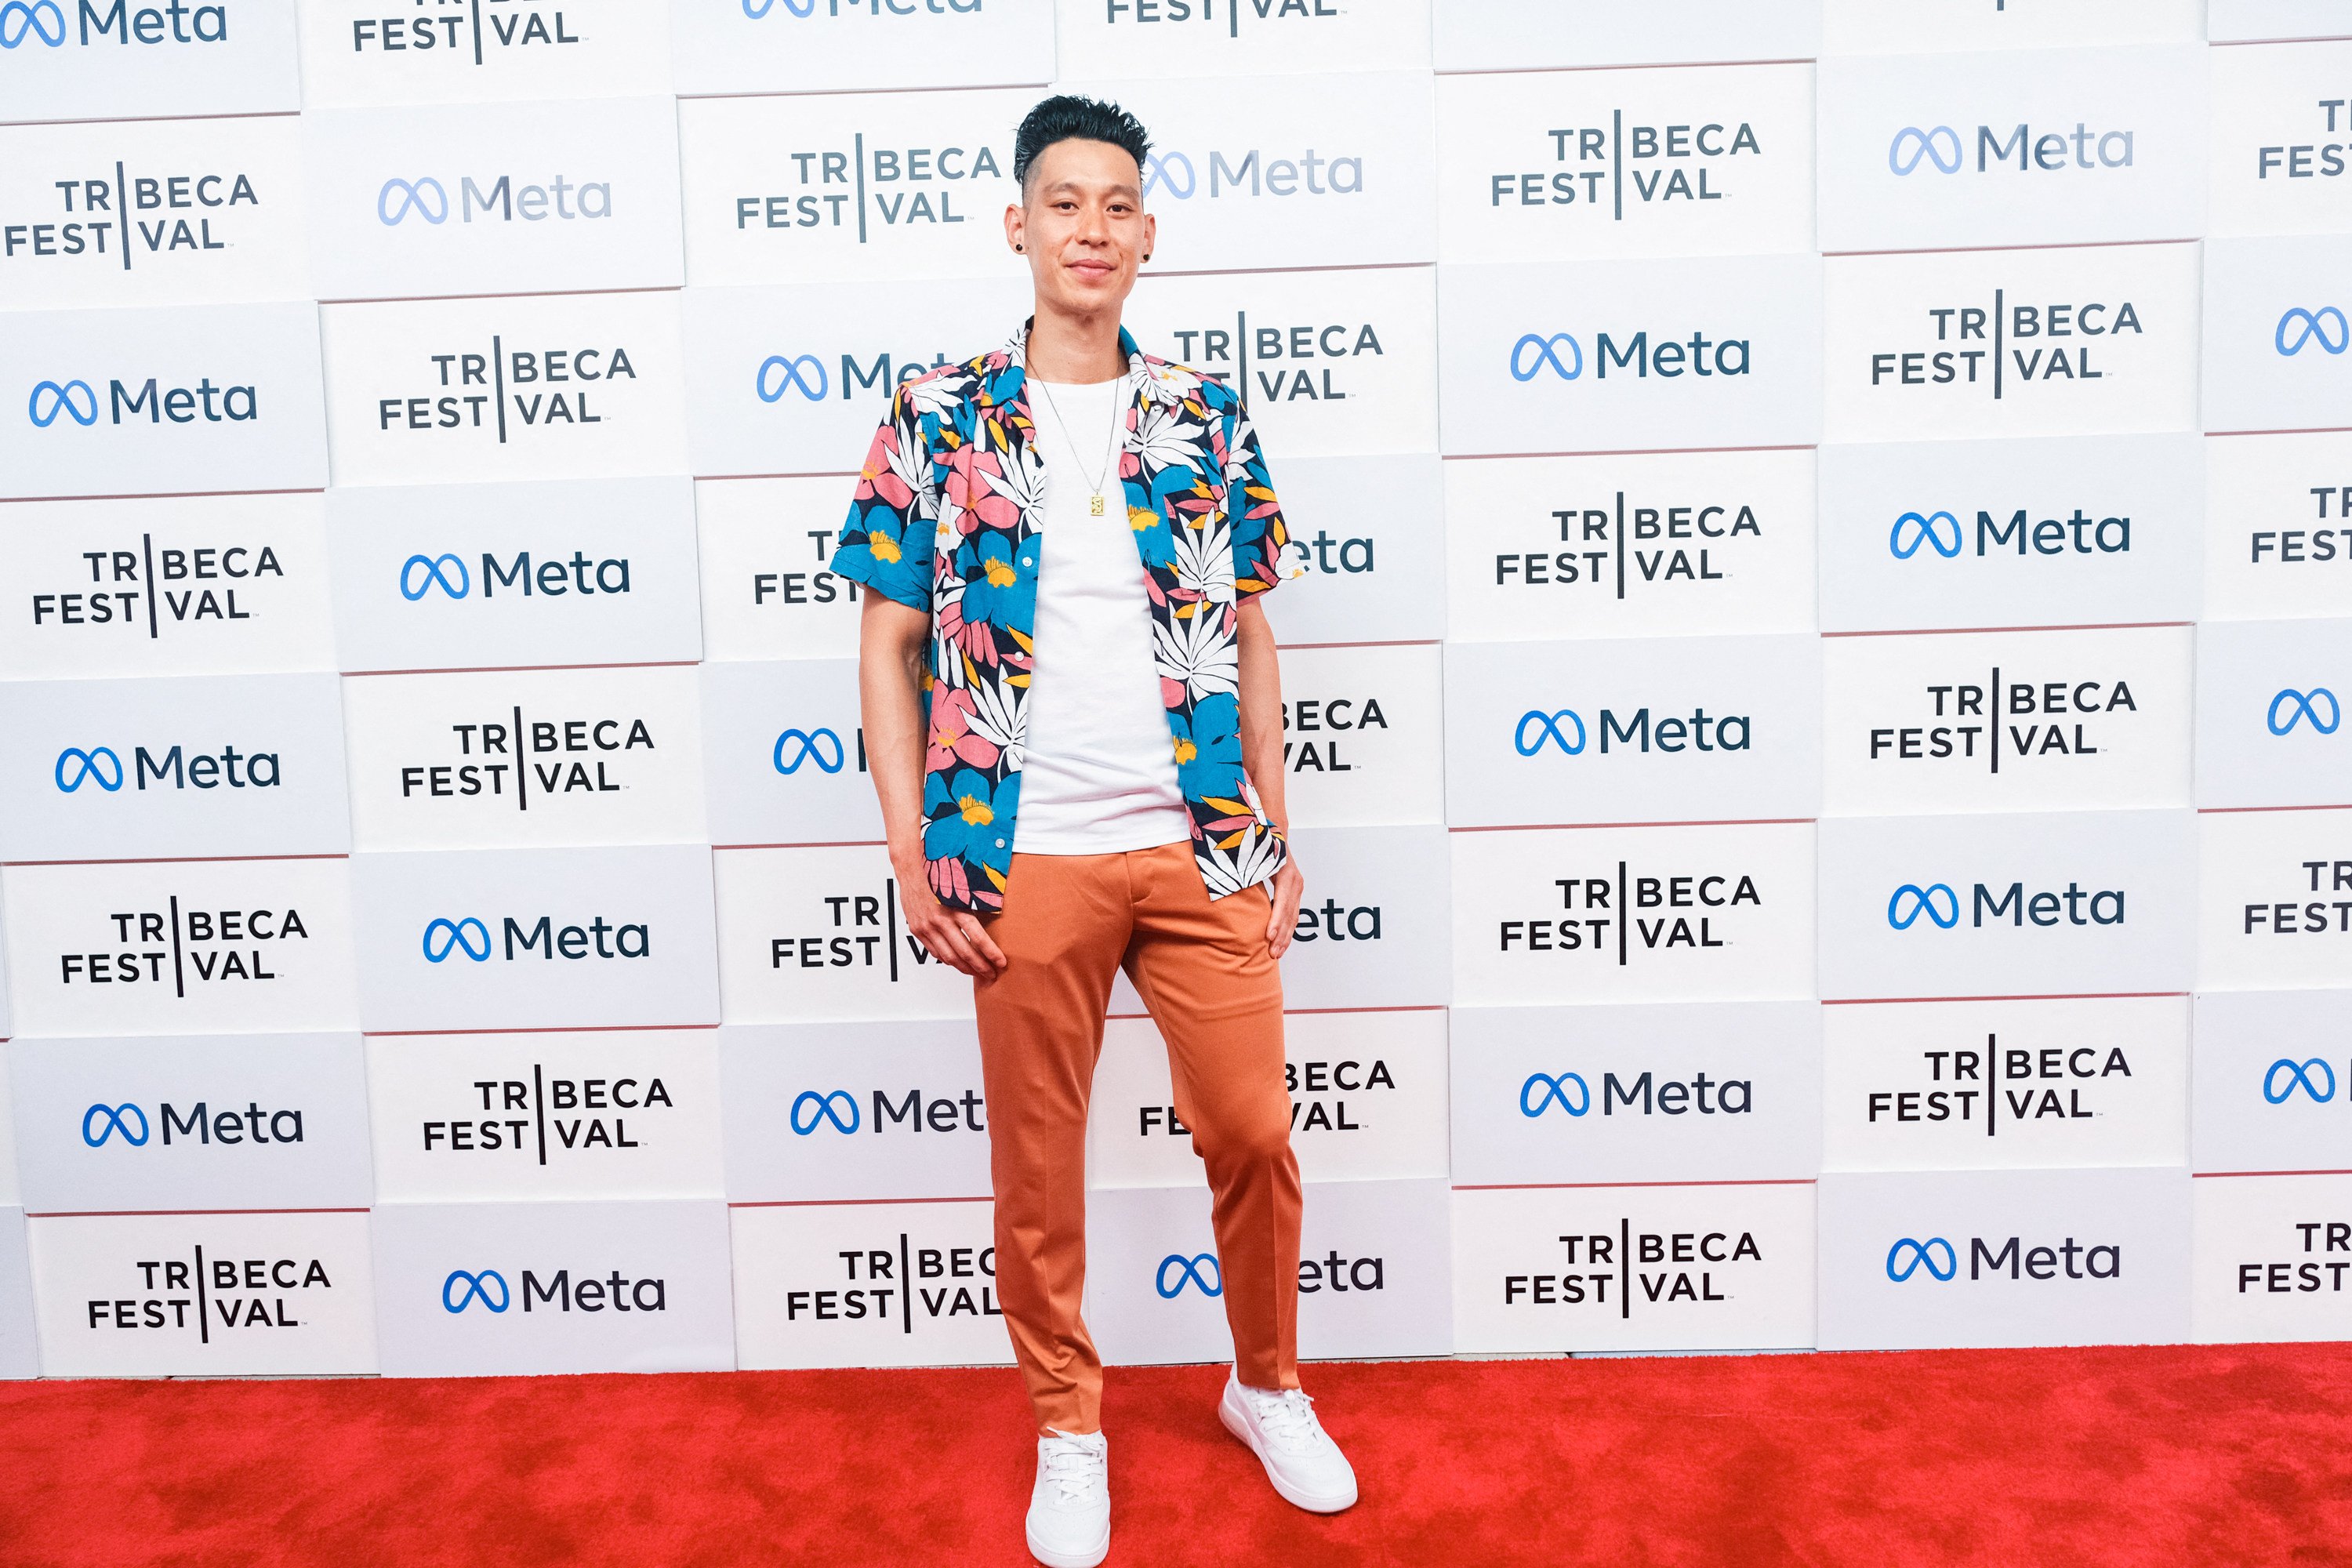 Jeremy Lin at the Tribeca Film Festival in New York on June 12, 2022. Photo: Getty Images